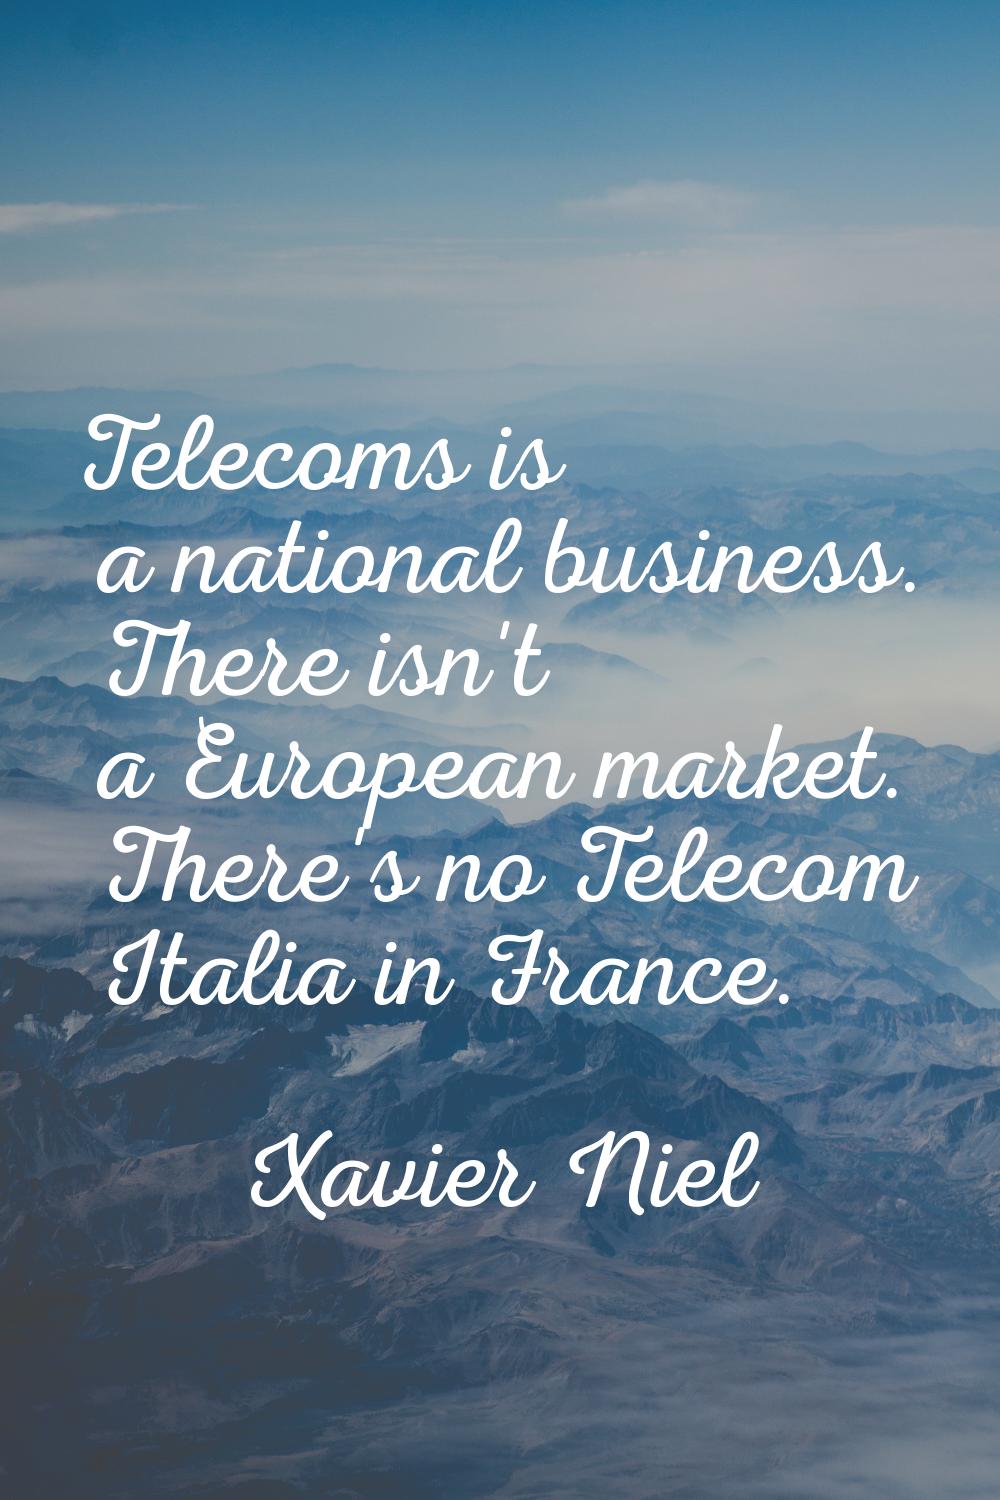 Telecoms is a national business. There isn't a European market. There's no Telecom Italia in France